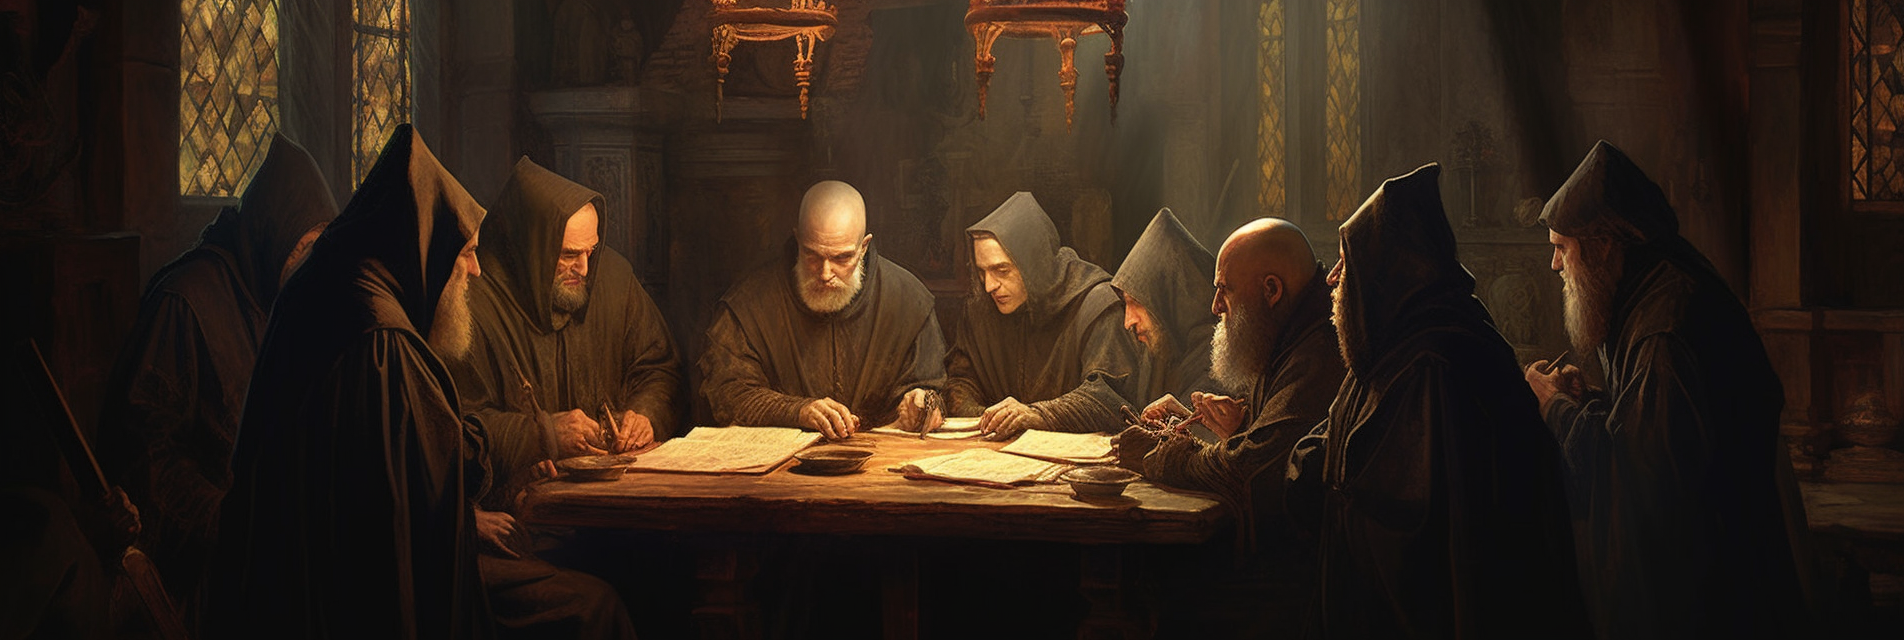 A group of men in robes gathered around a table, studying papers